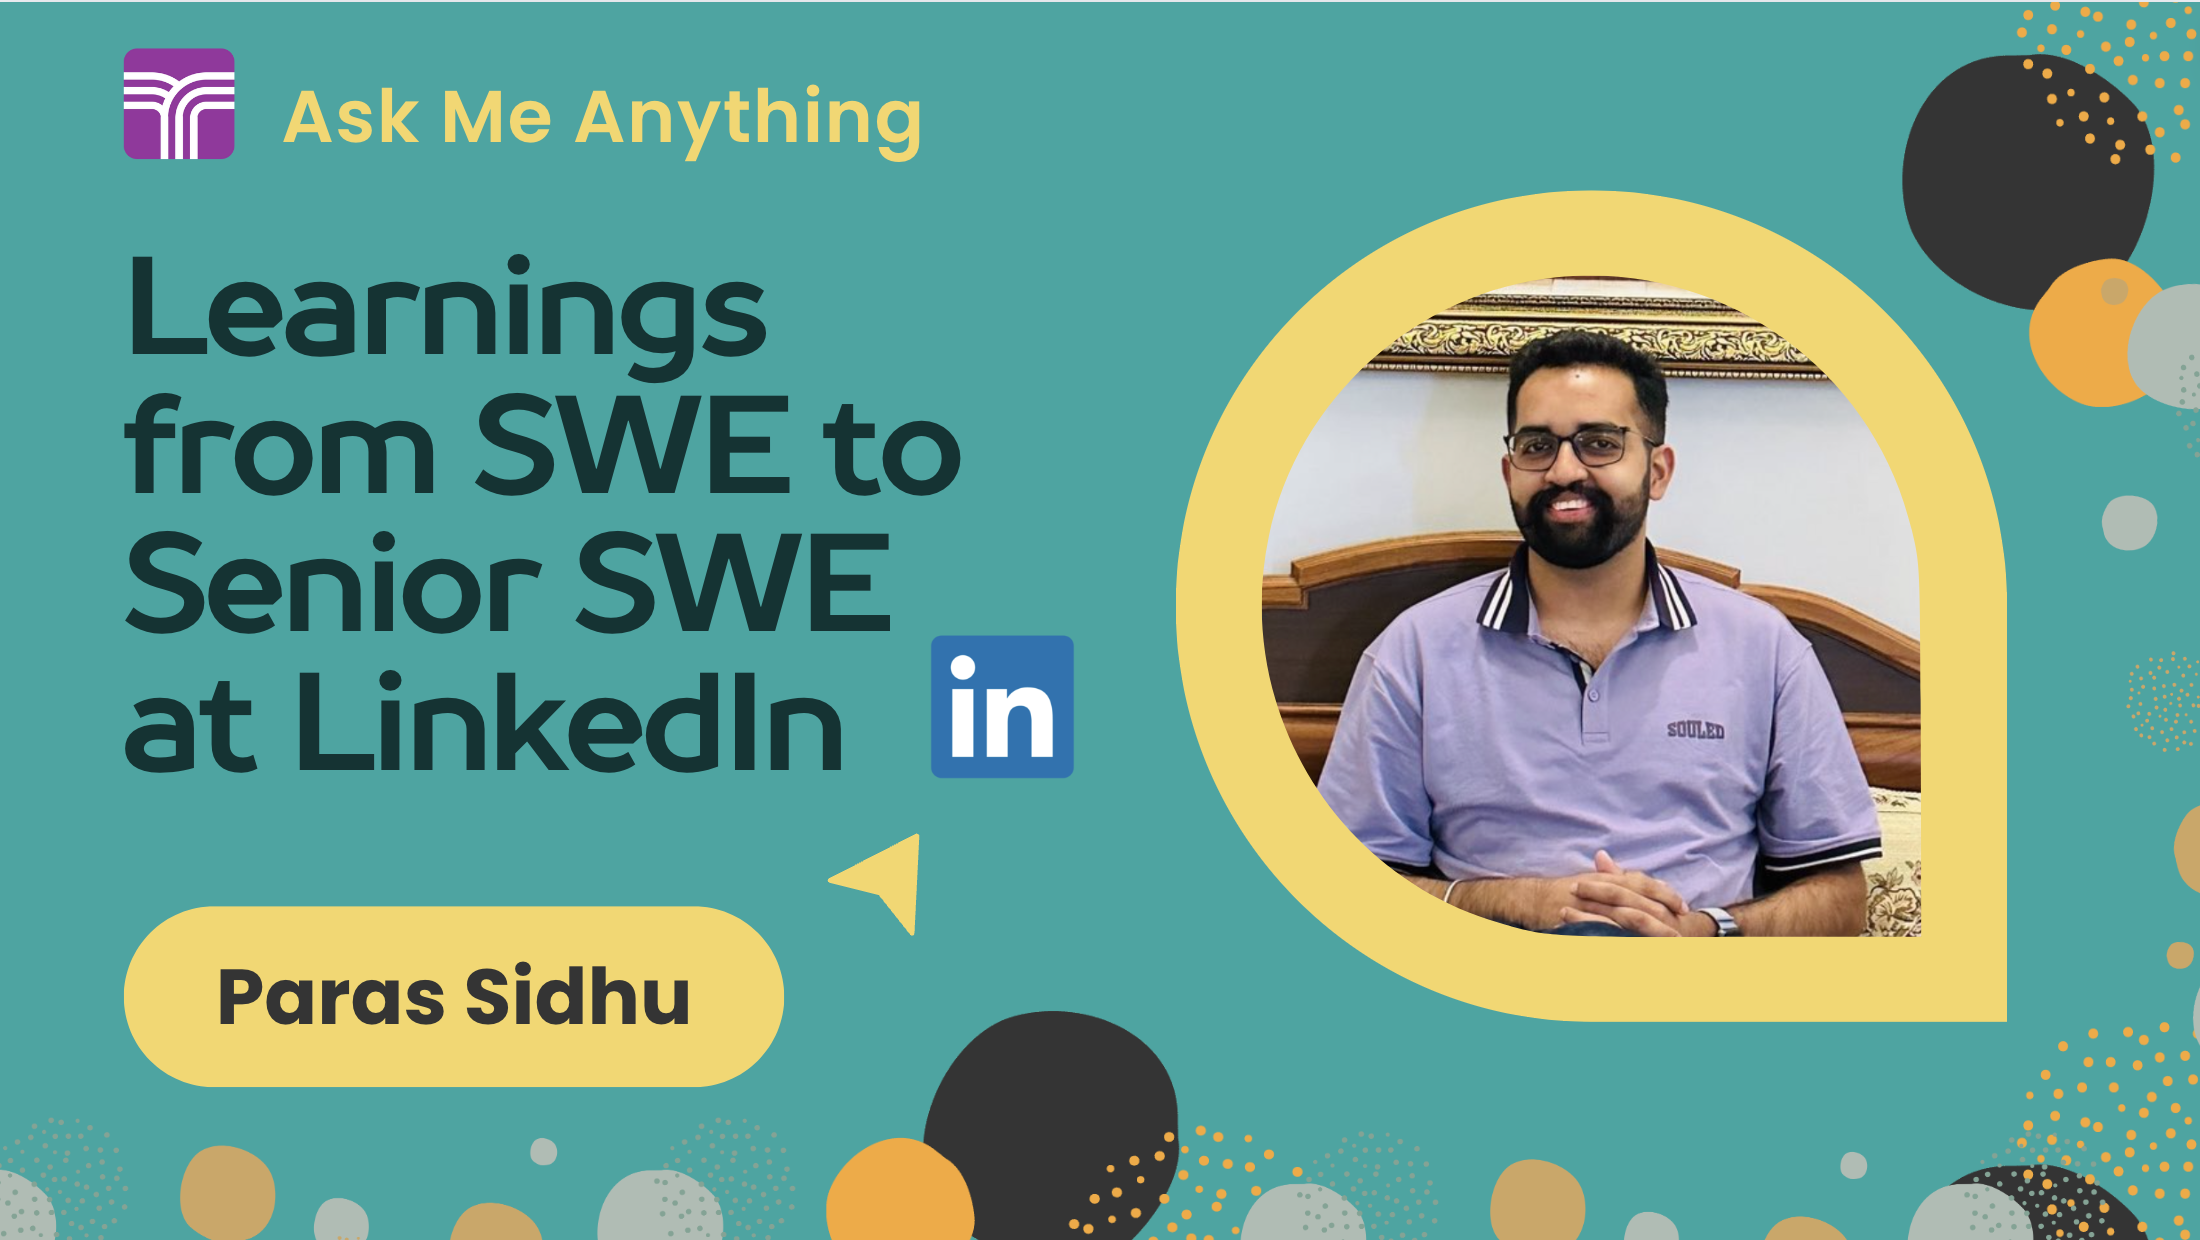 Learnings from SWE to Senior SWE at LinkedIn event